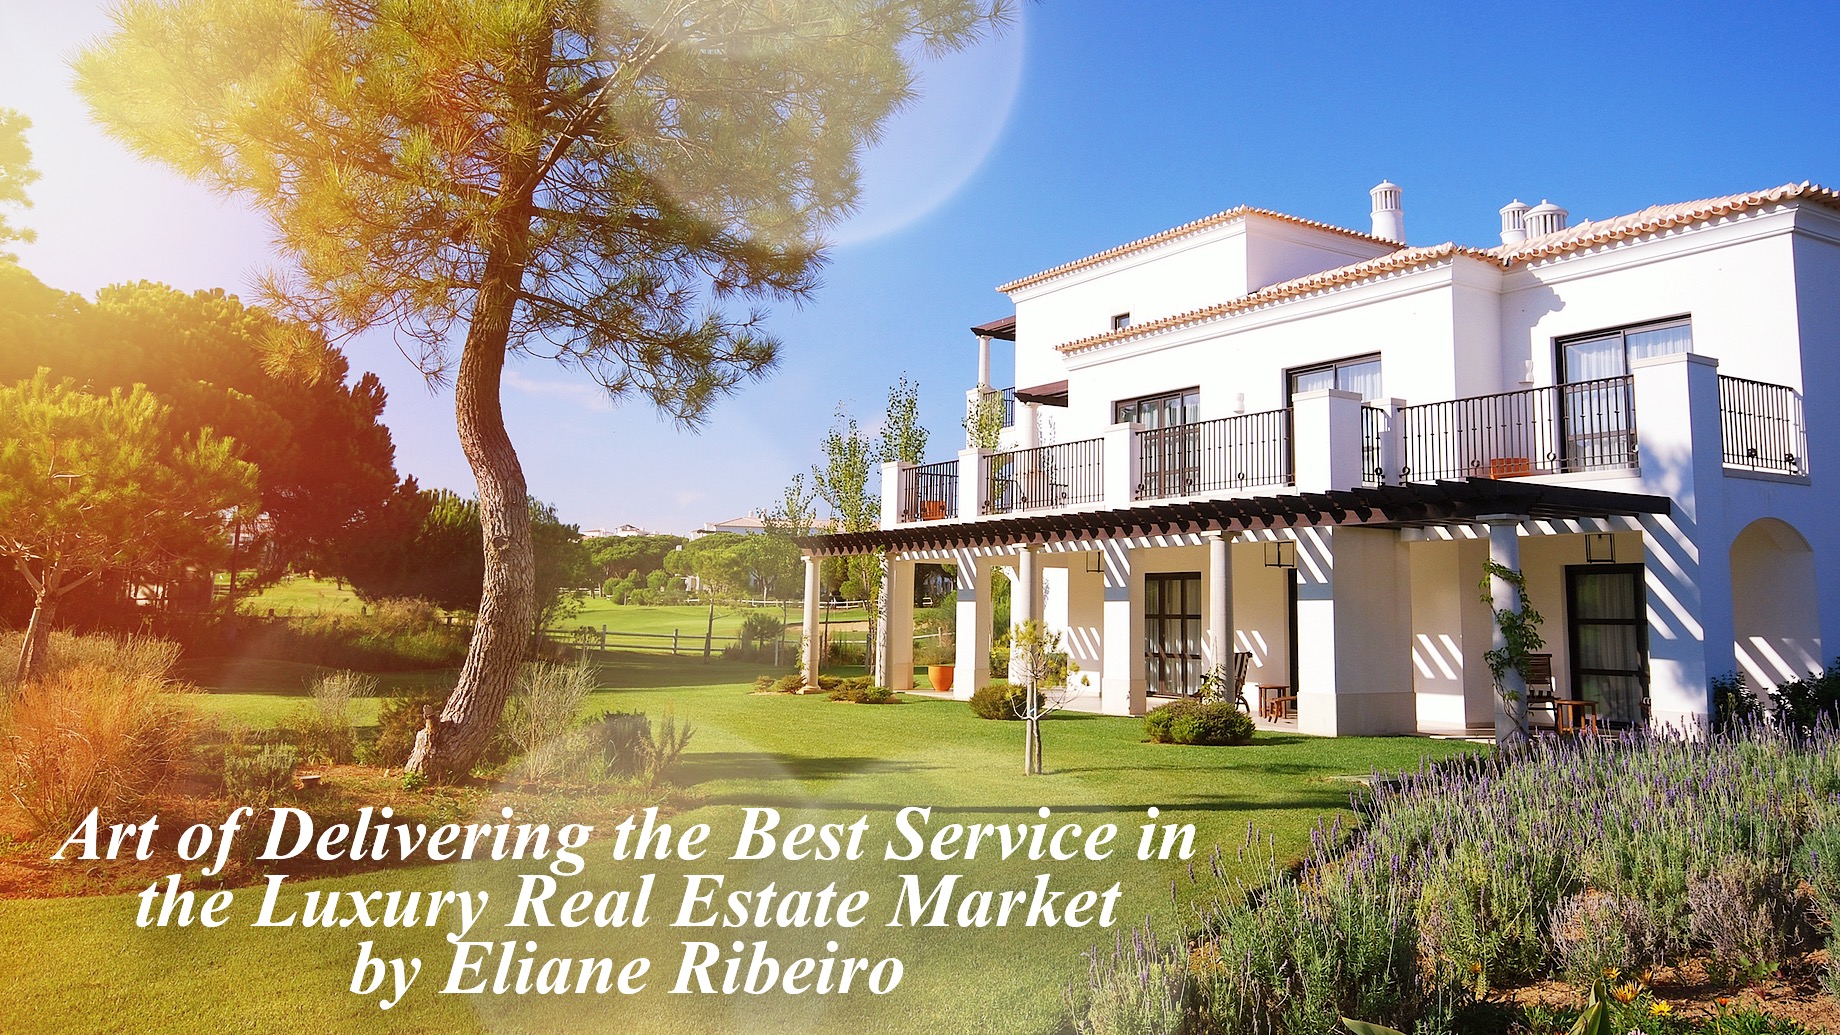 Art of Delivering the Best Service in the Luxury Real Estate Market by Eliane Ribeiro